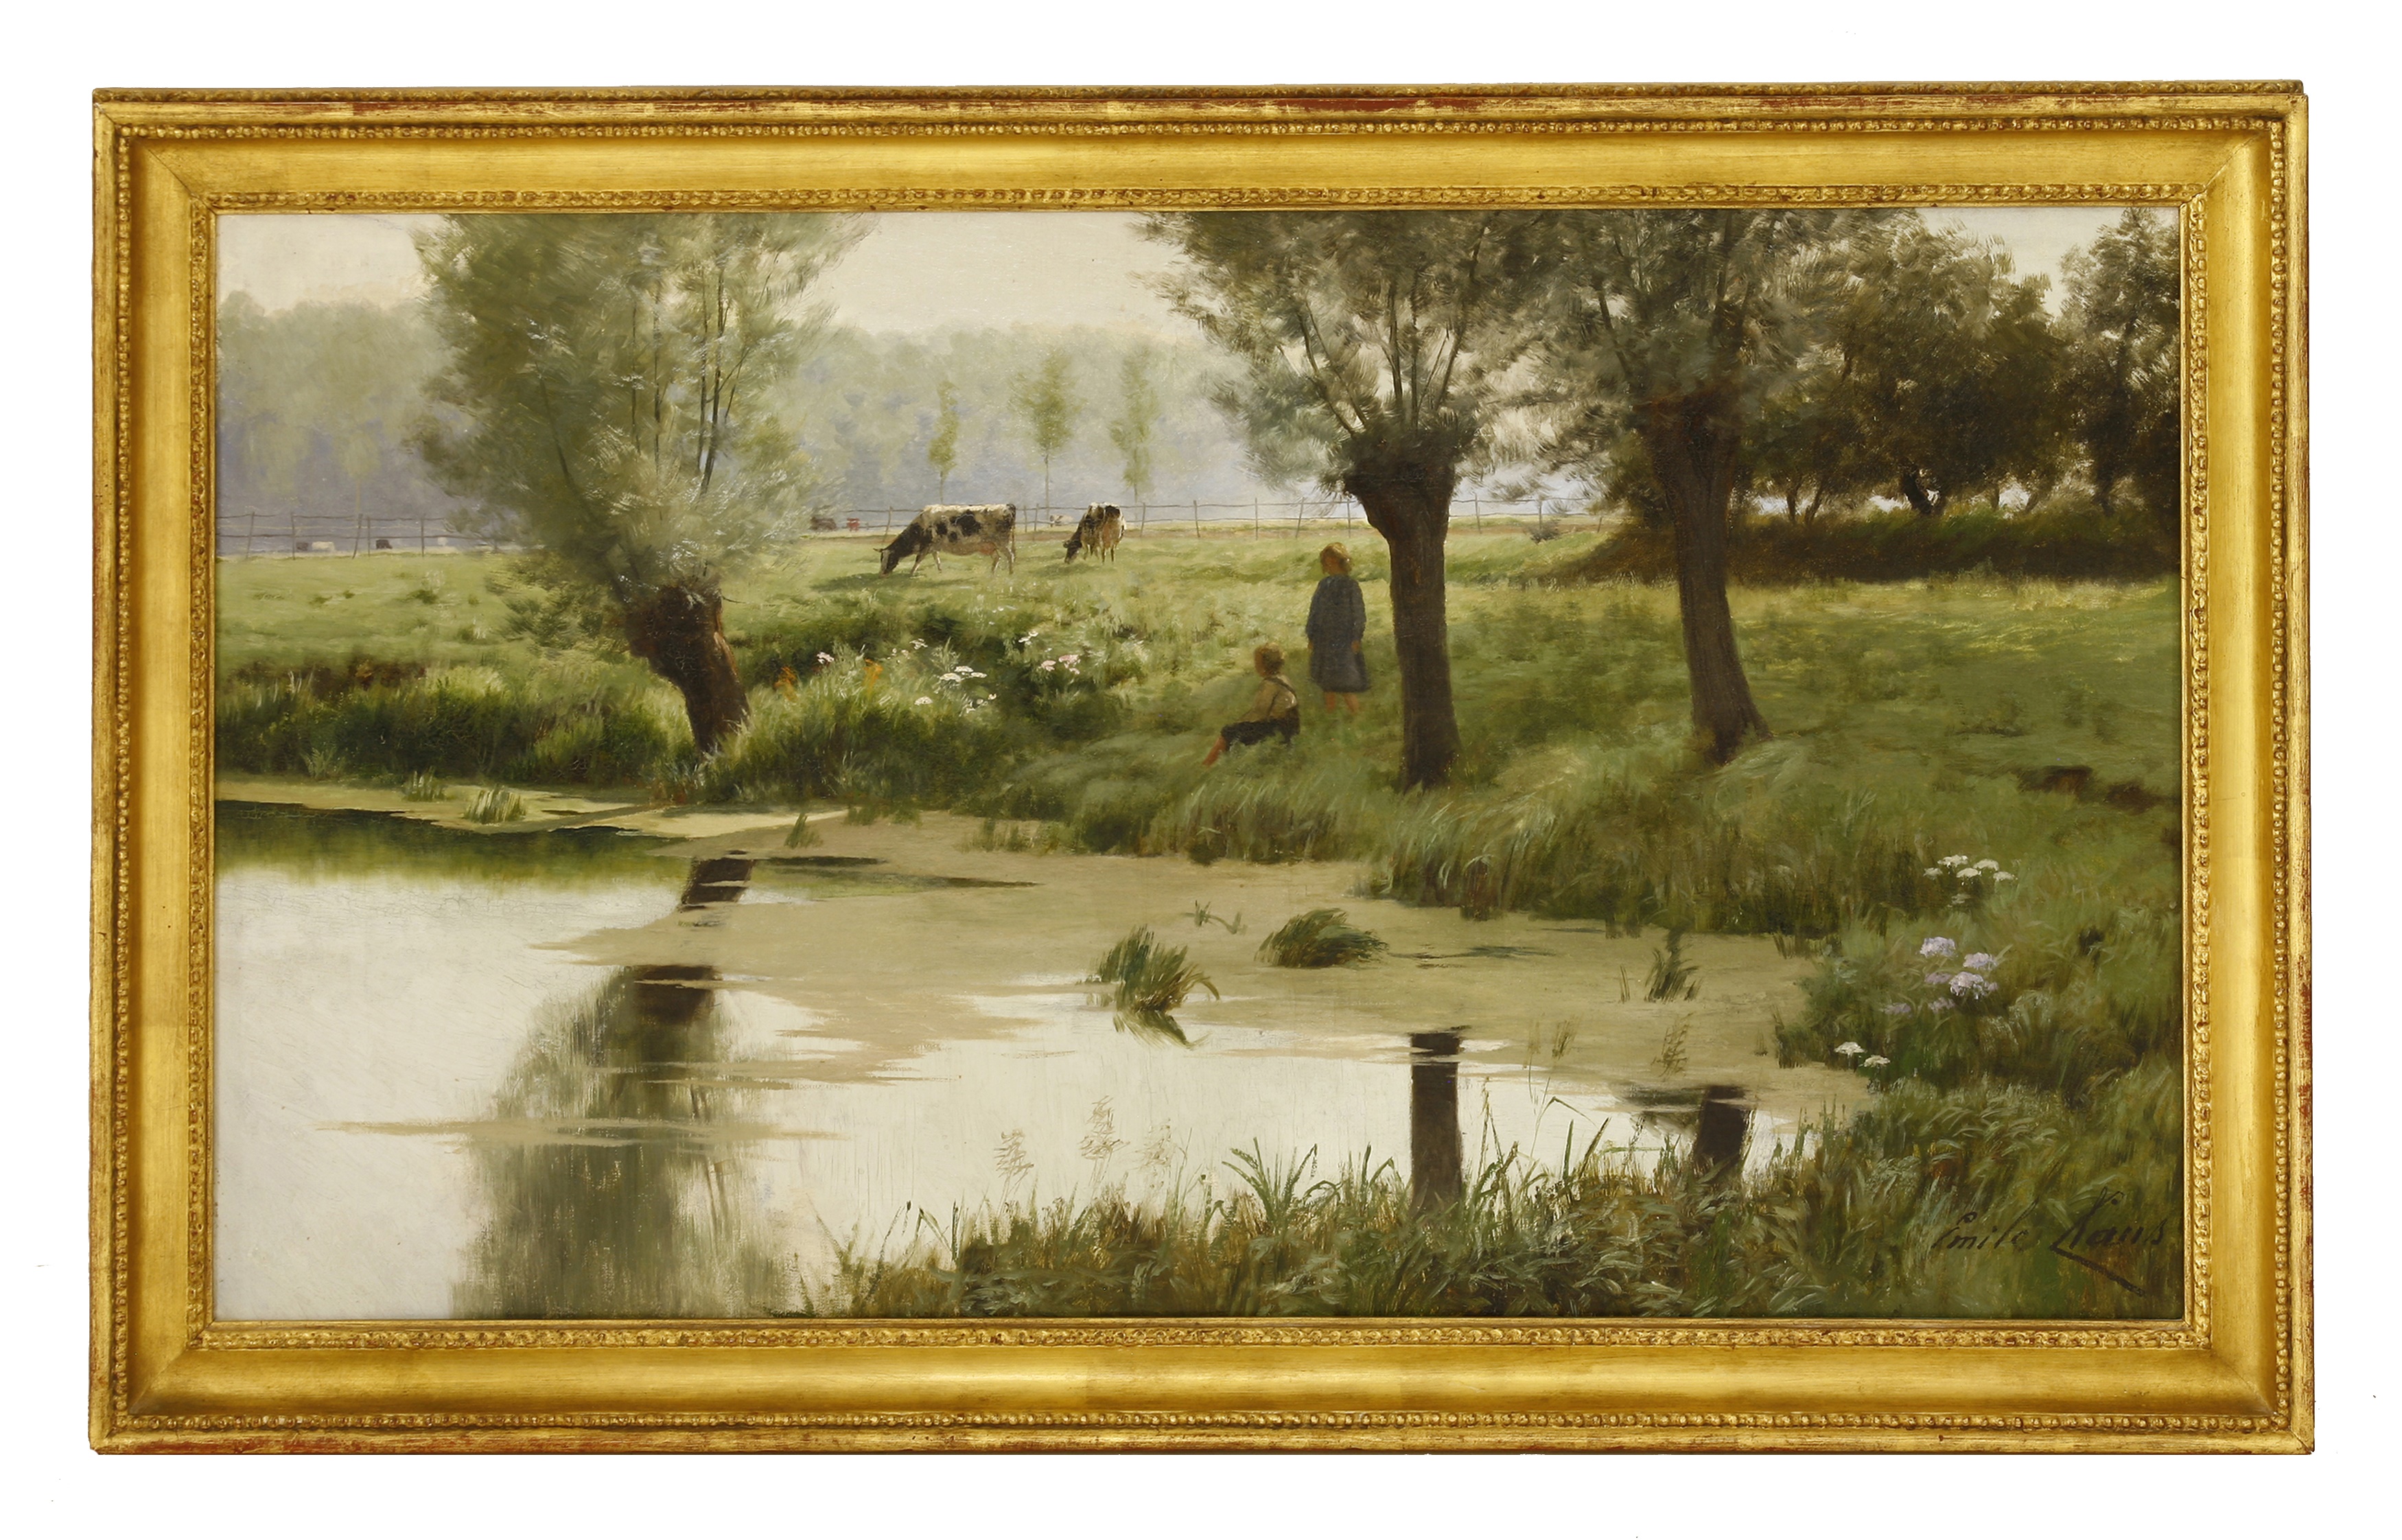 Emile Claus (Belgian, 1849-1924) A PASTORAL SCENE WITH CHILDREN AND CATTLE BY A POND